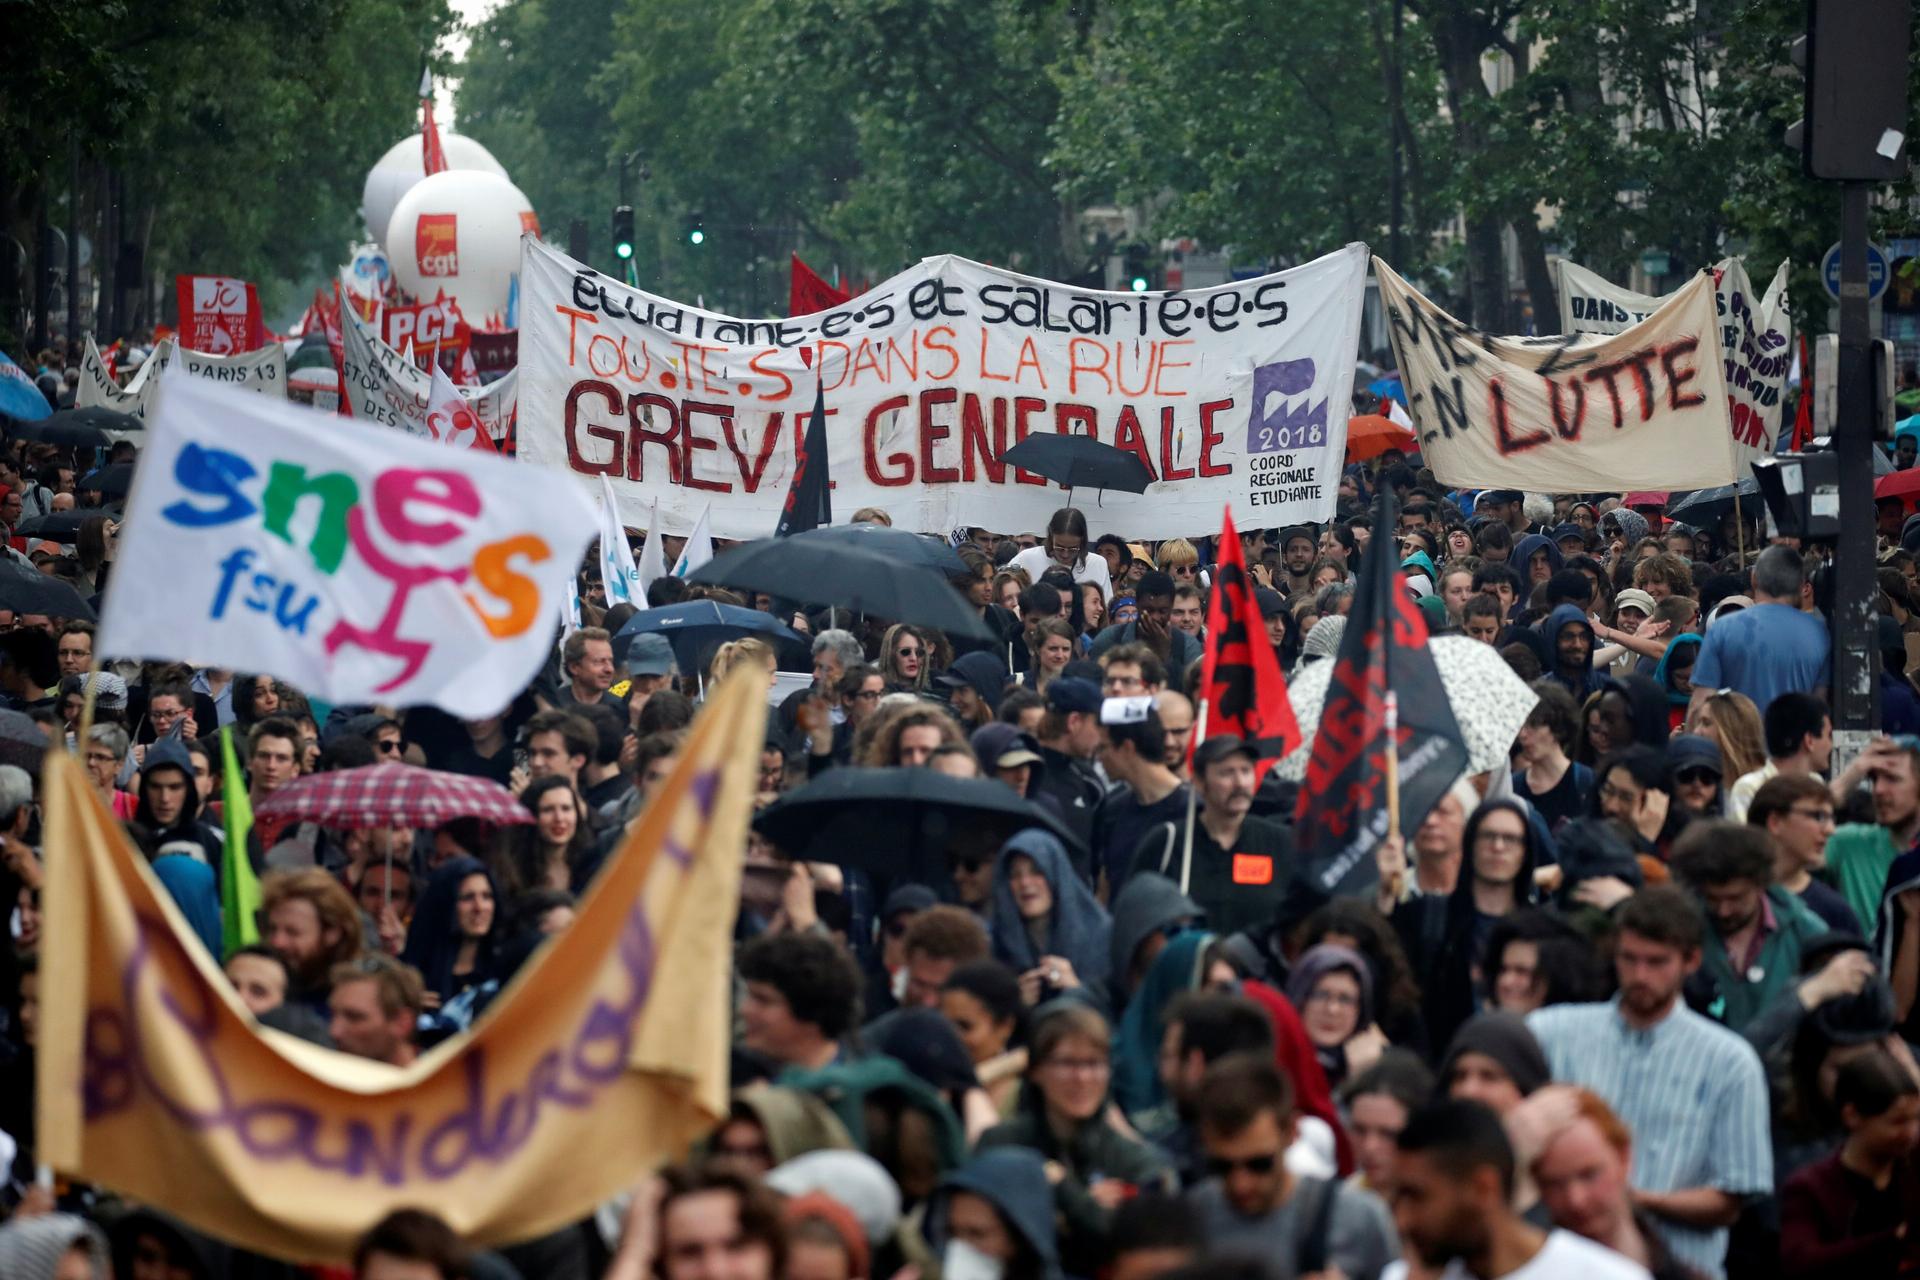 French civil servants and students carry labor union flags and banners as they march in protest during a national day of strikes by public sector workers, in Paris, France, May 22